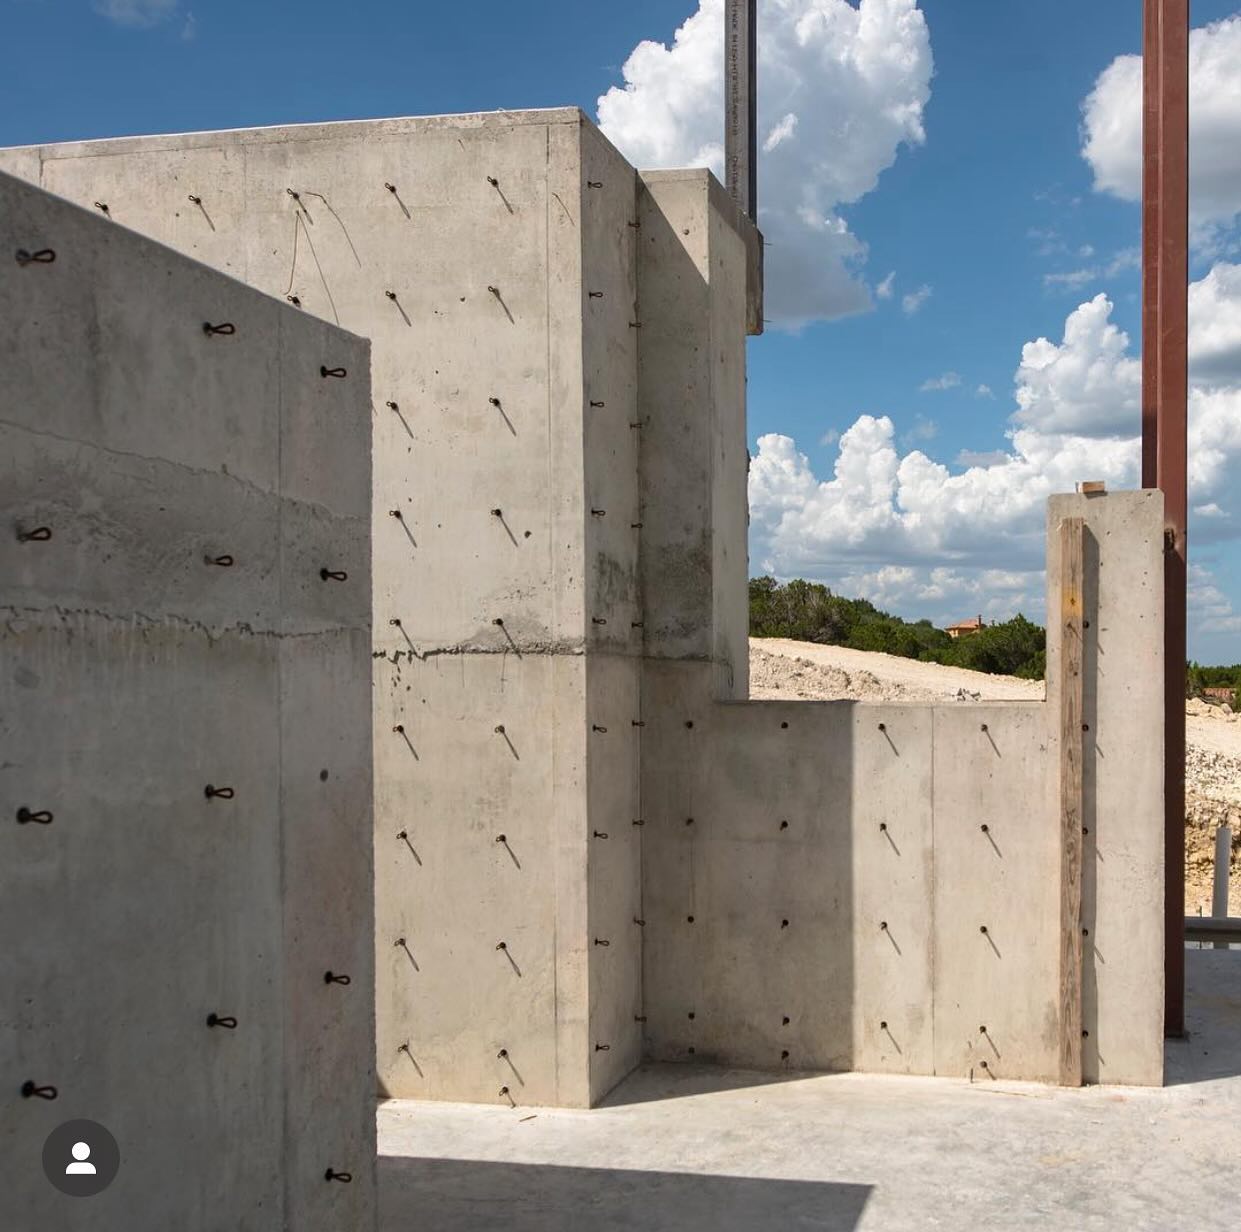 Structural Concrete can be just as satisfying as the completed home.